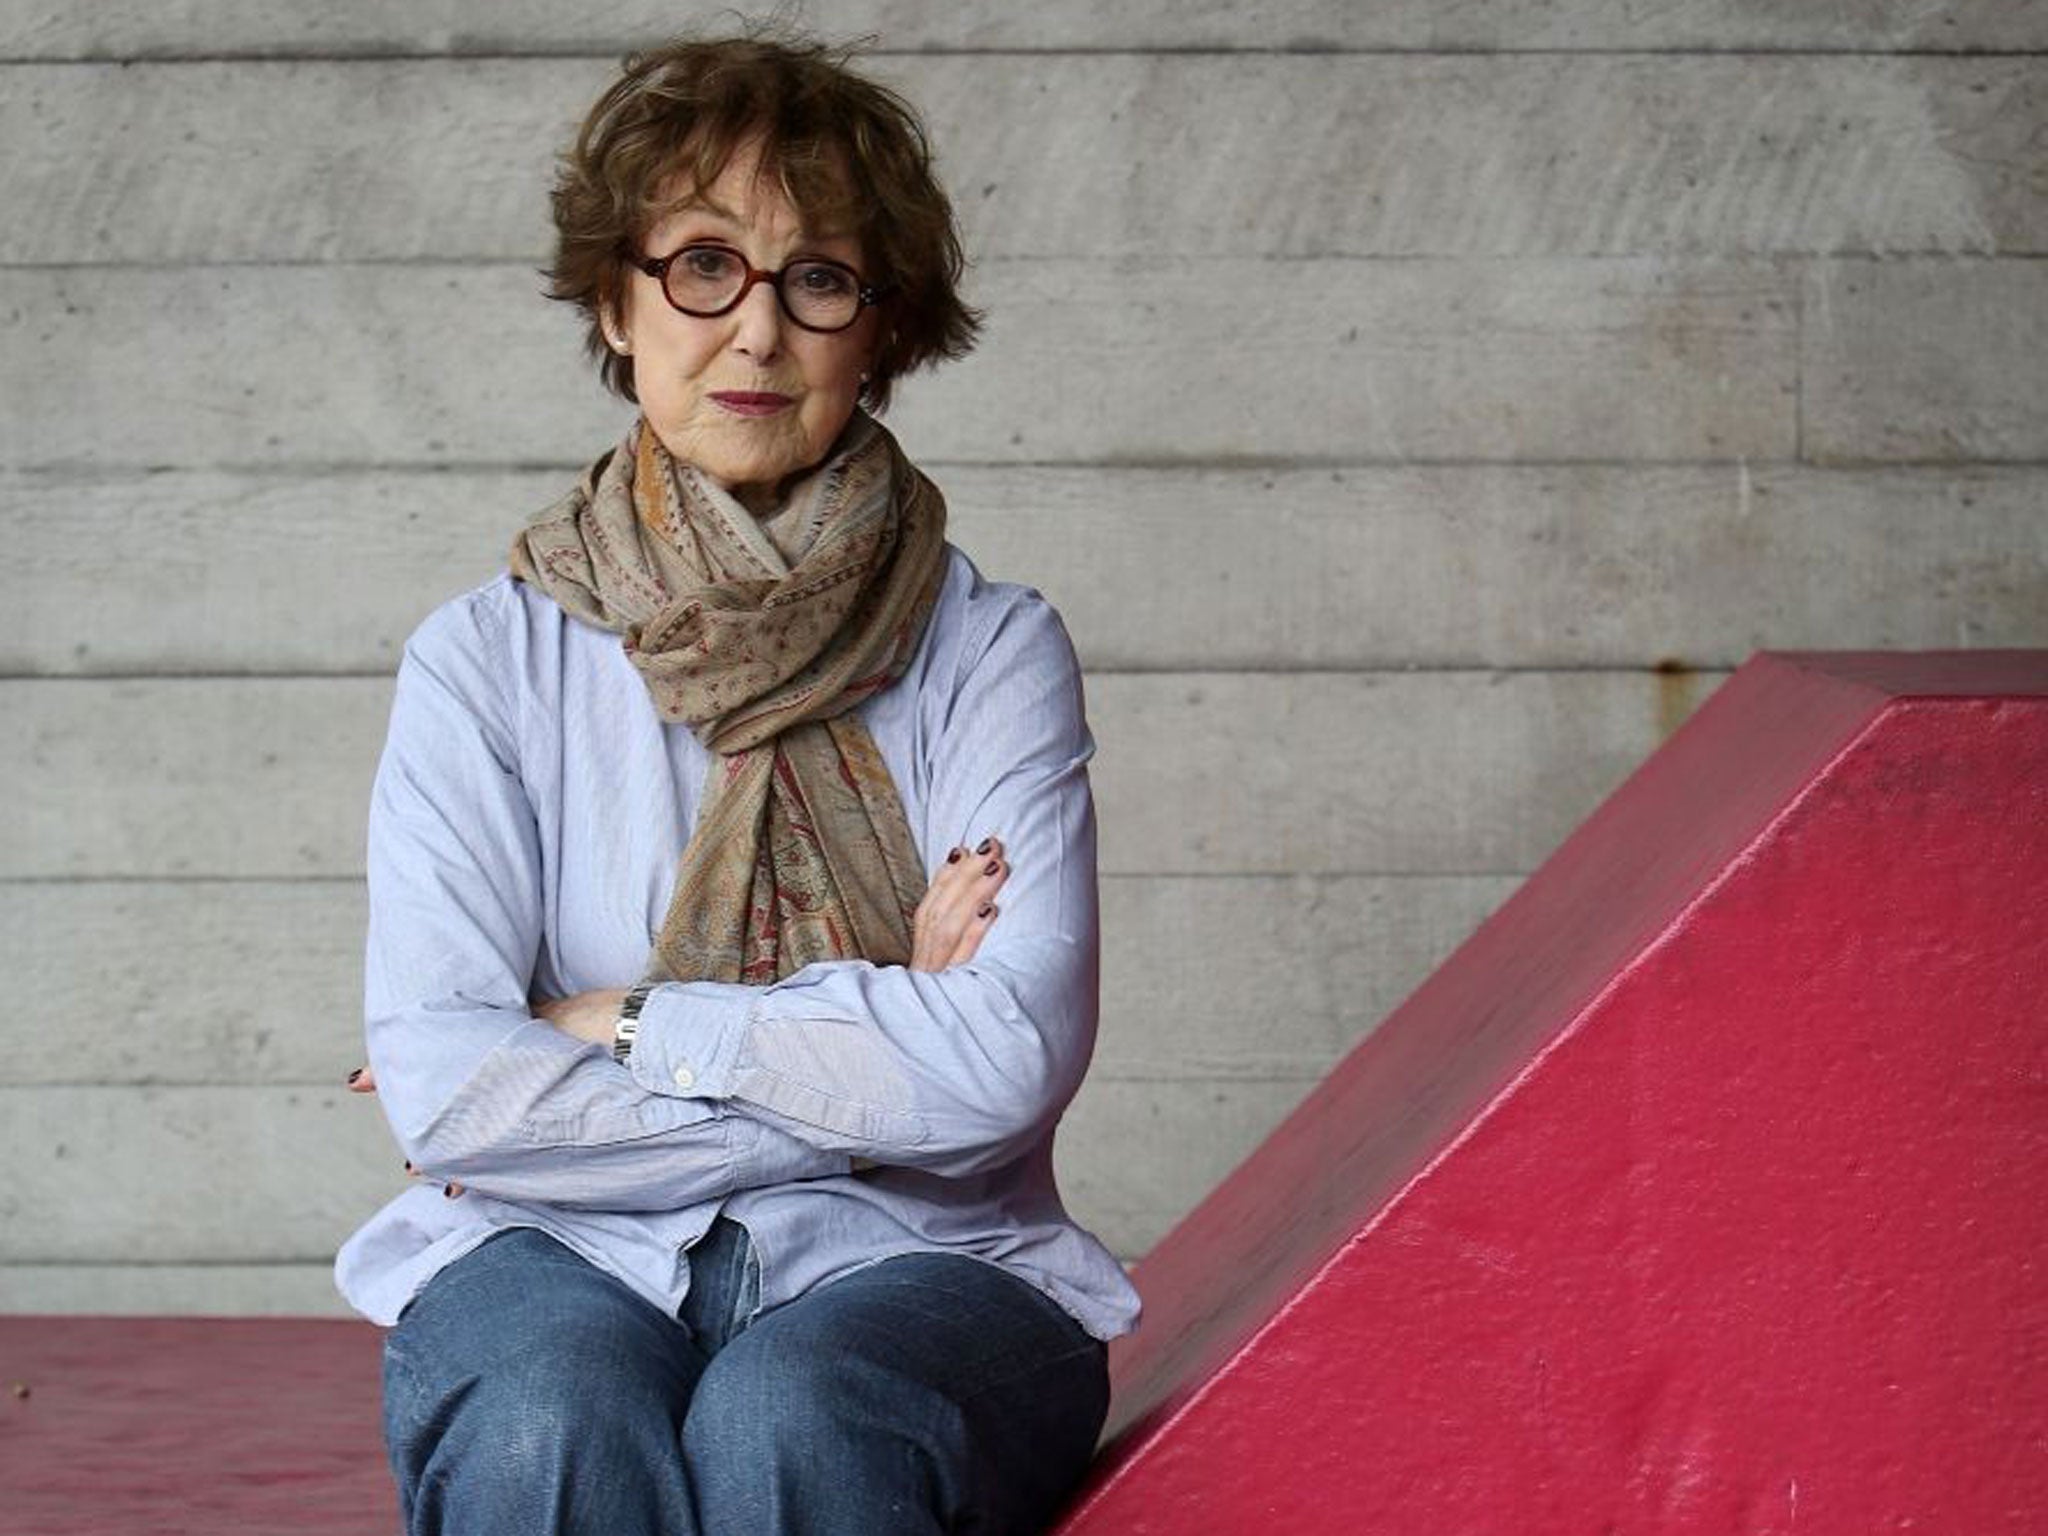 Her lips are sealed: Una Stubbs is keeping mum about Sherlock